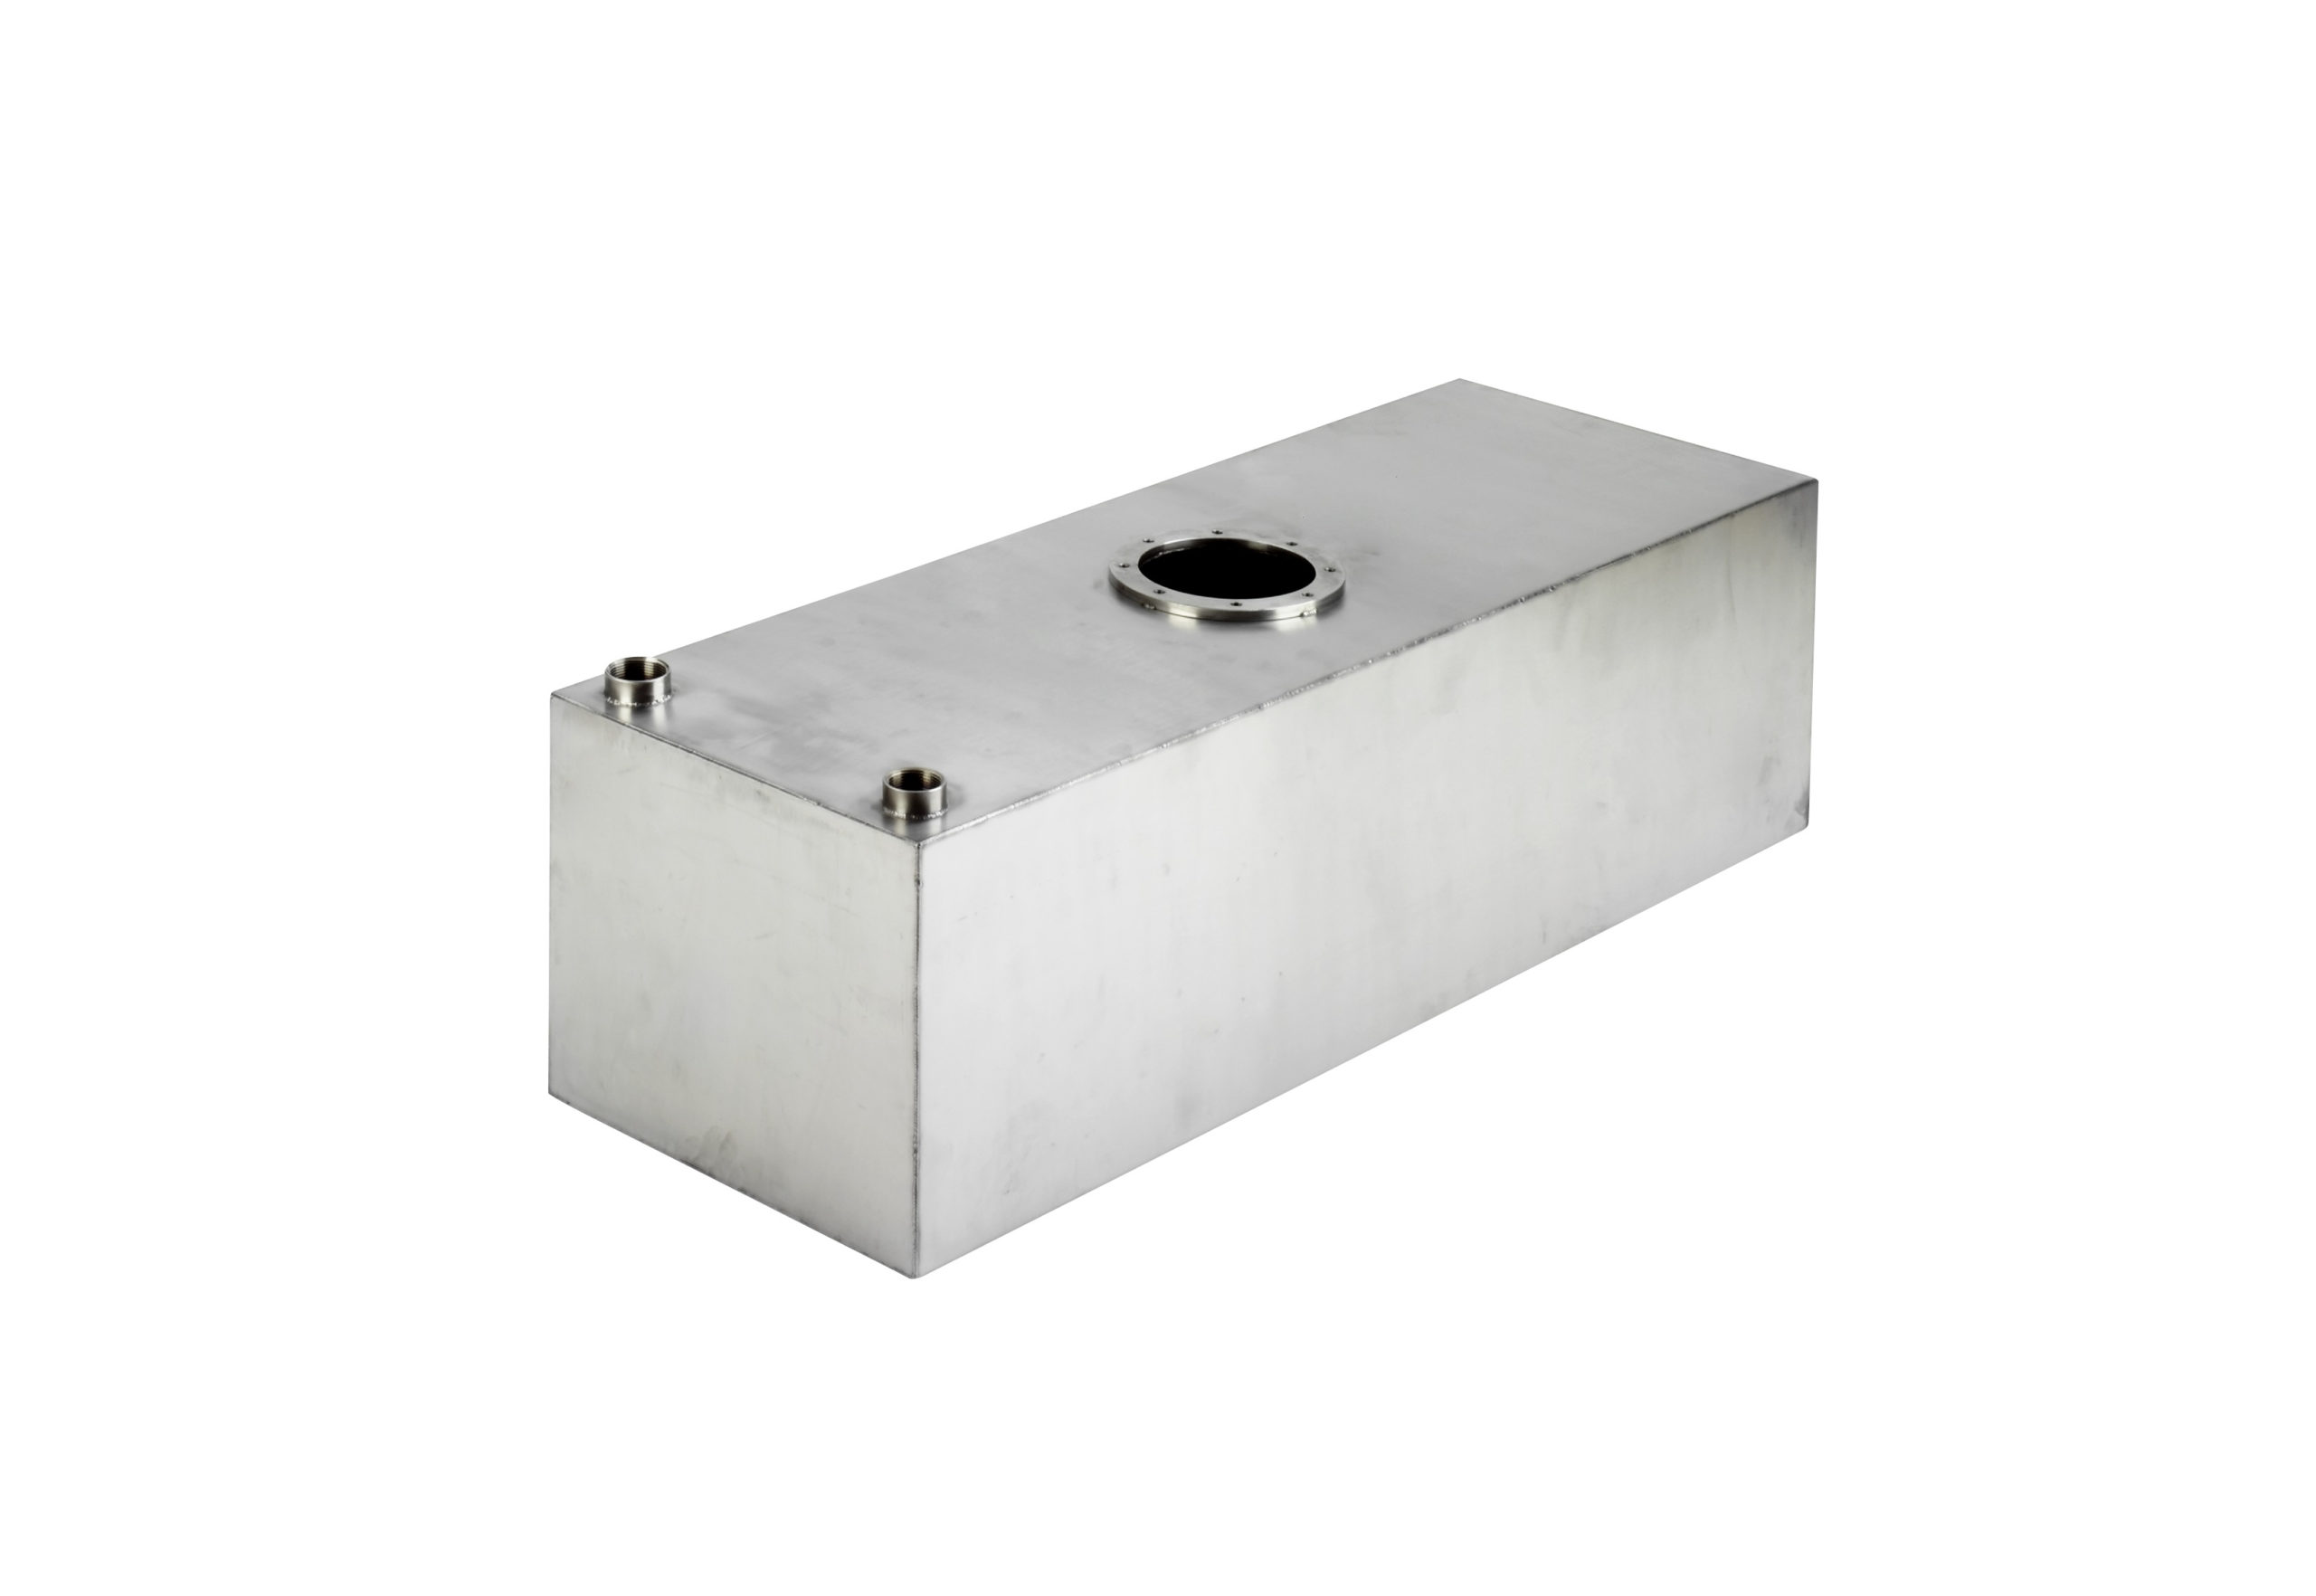 190 Litre Stainless Steel Tank - Drinking Water or Waste Water